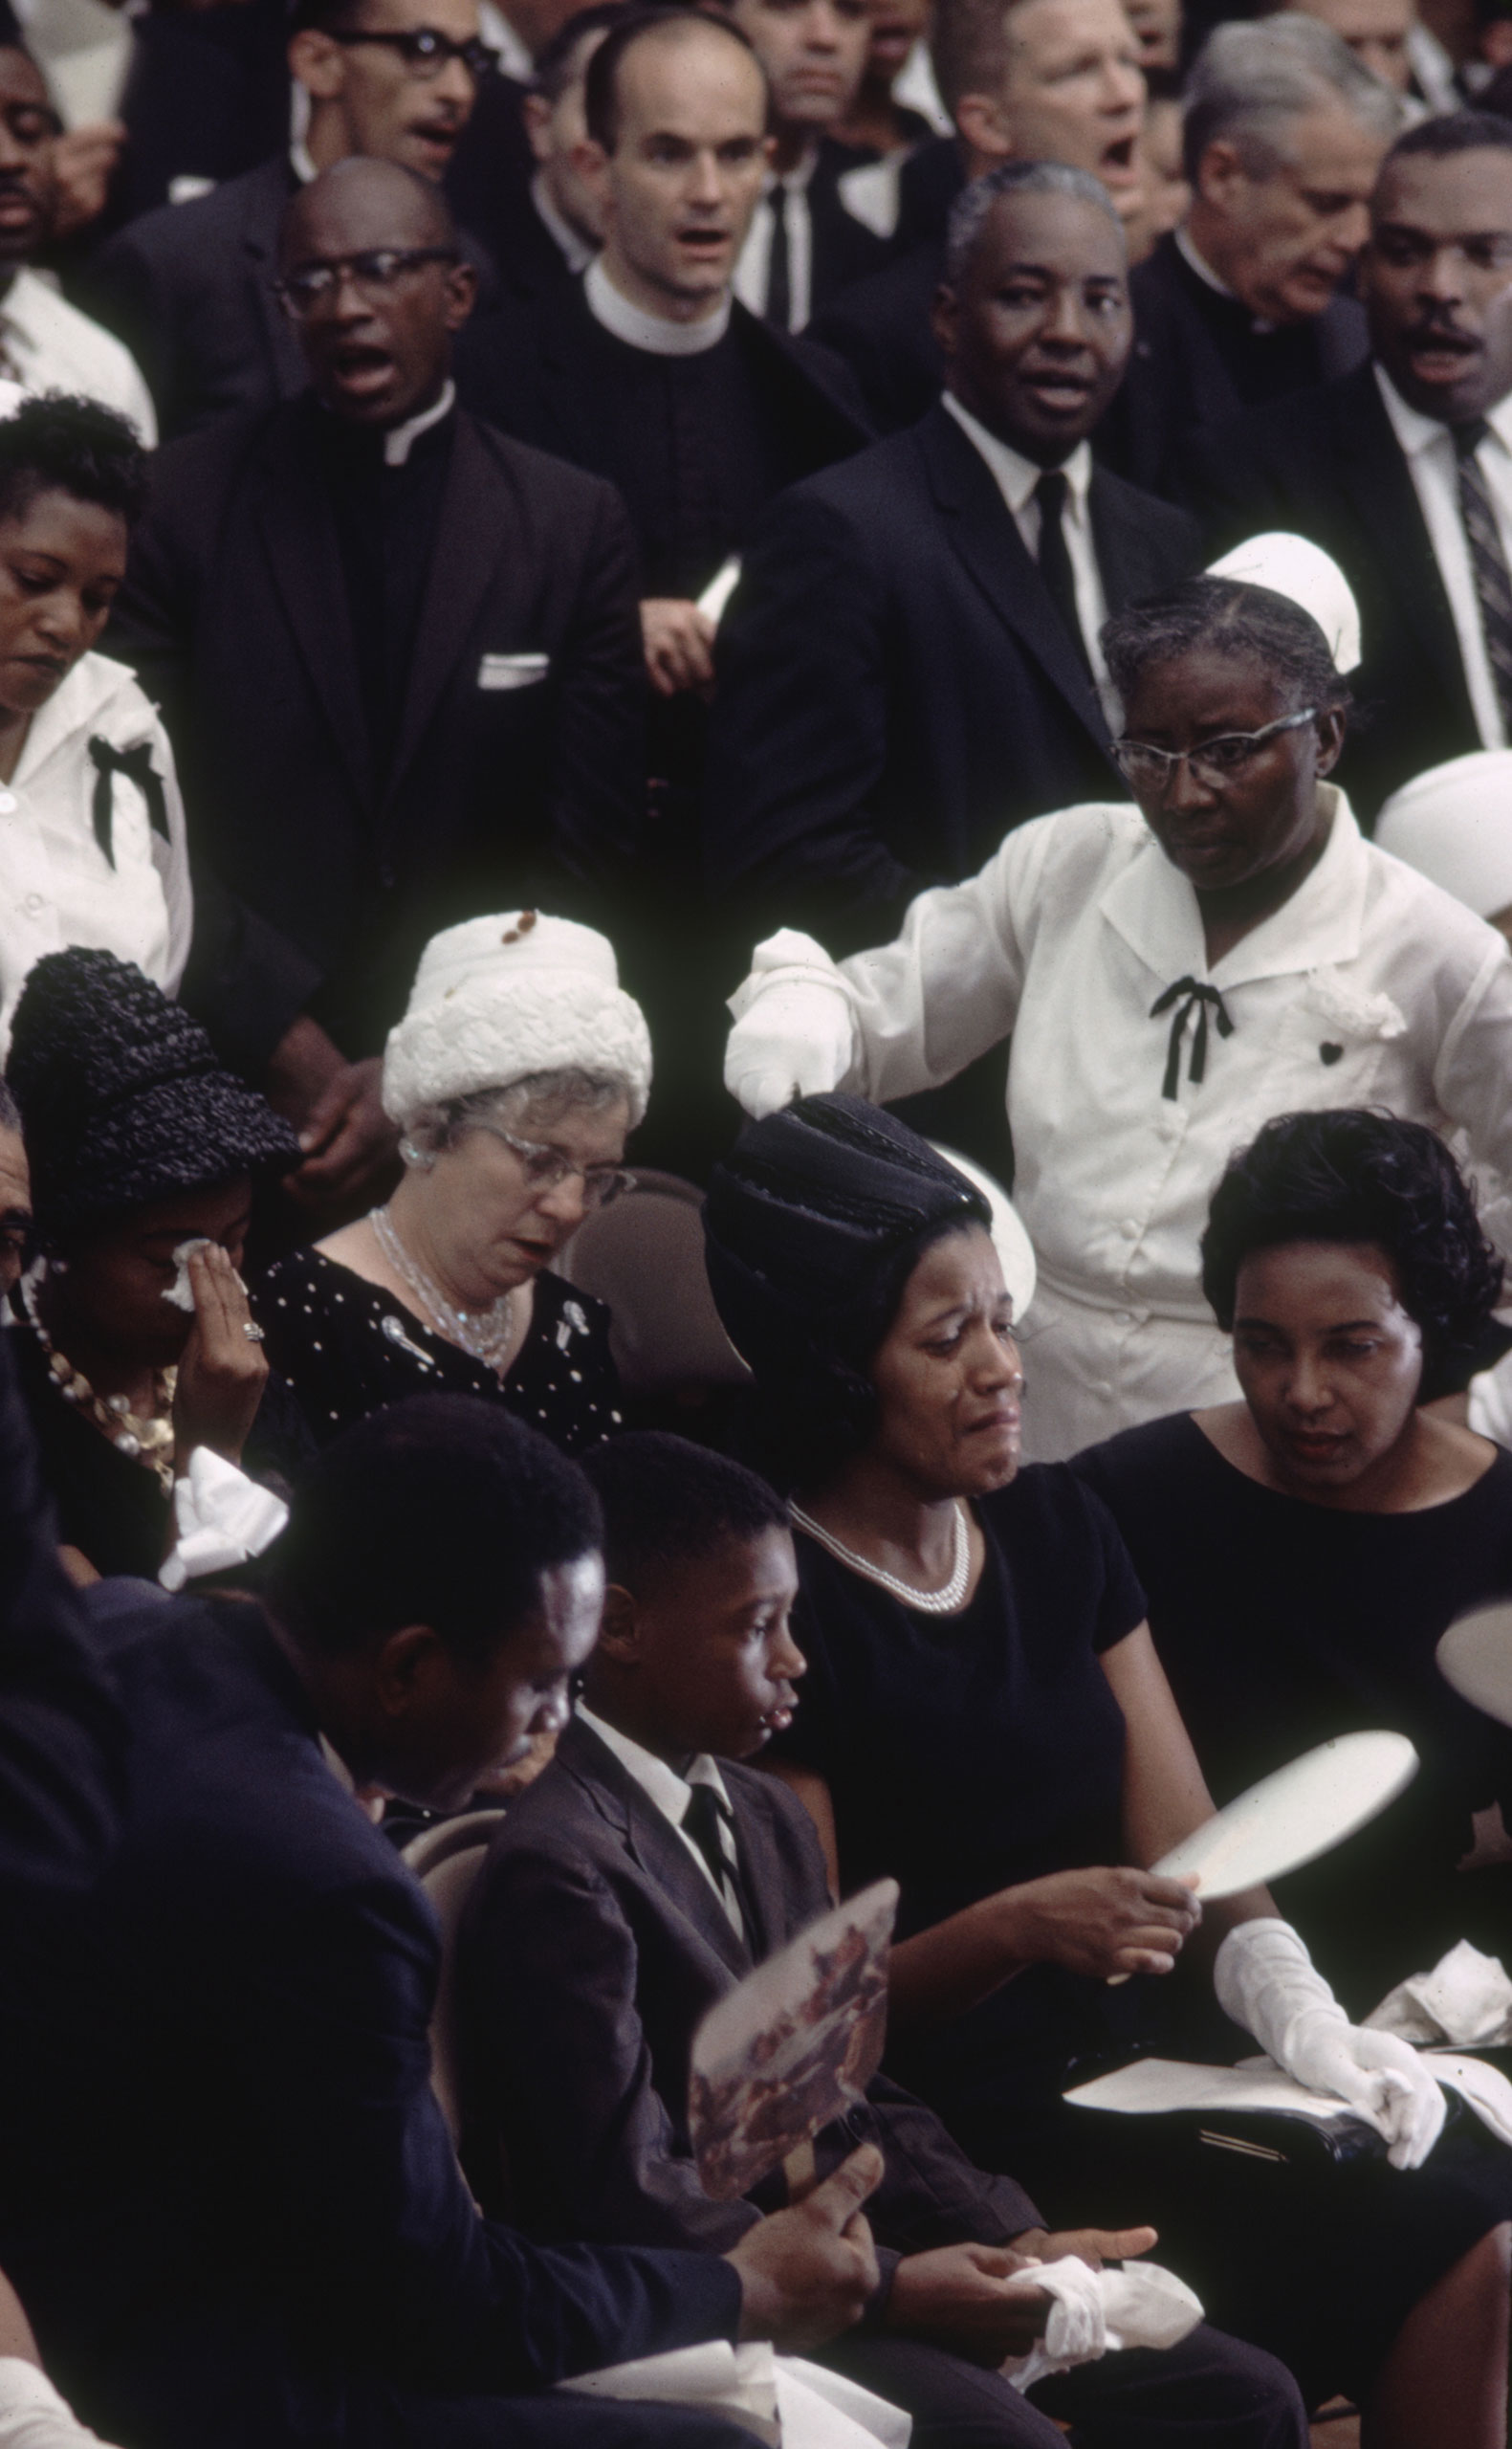 Myrlie Evers (front row, second from right), wife of Medgar Evers; her son, Darrell Kenyatta; and other mourners at Medgar Evers' funeral, Jackson, Miss., June 15, 1963.